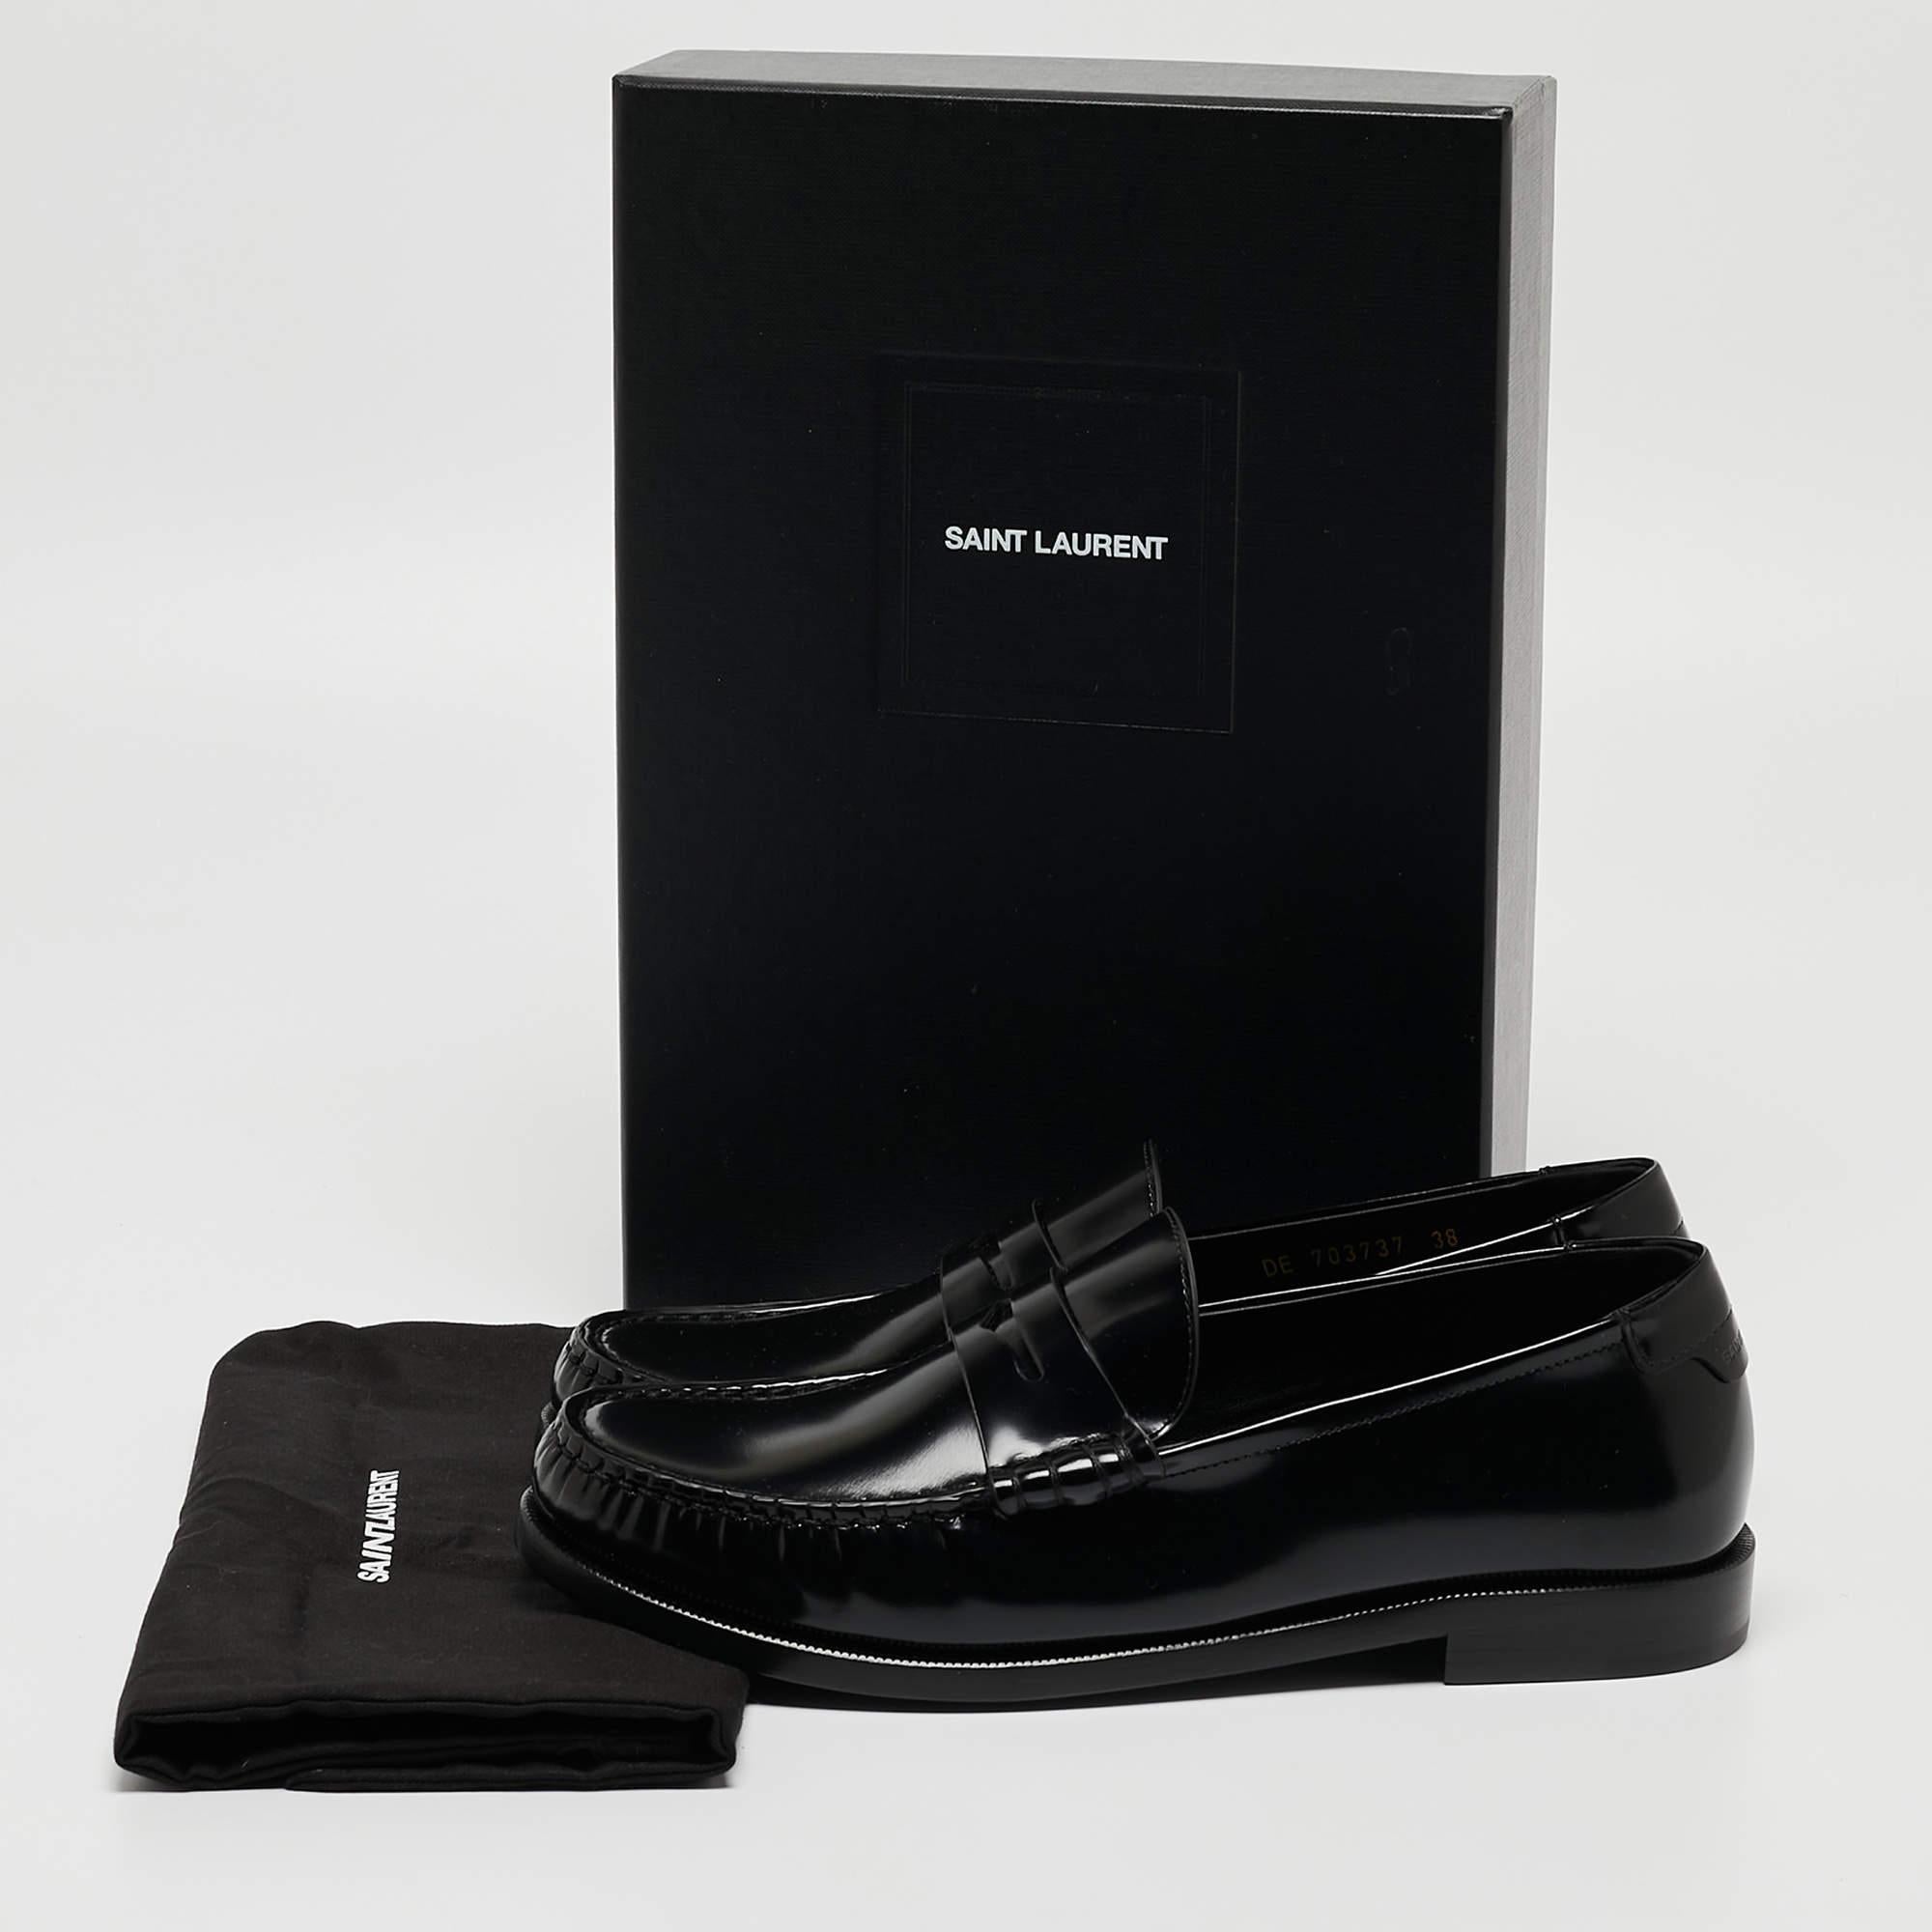 Practical, fashionable, and durable—these Saint Laurent loafers are carefully built to be fine companions to your everyday style. They come made using the best materials to be a prized buy.

Includes: Original Dustbag, Original Box